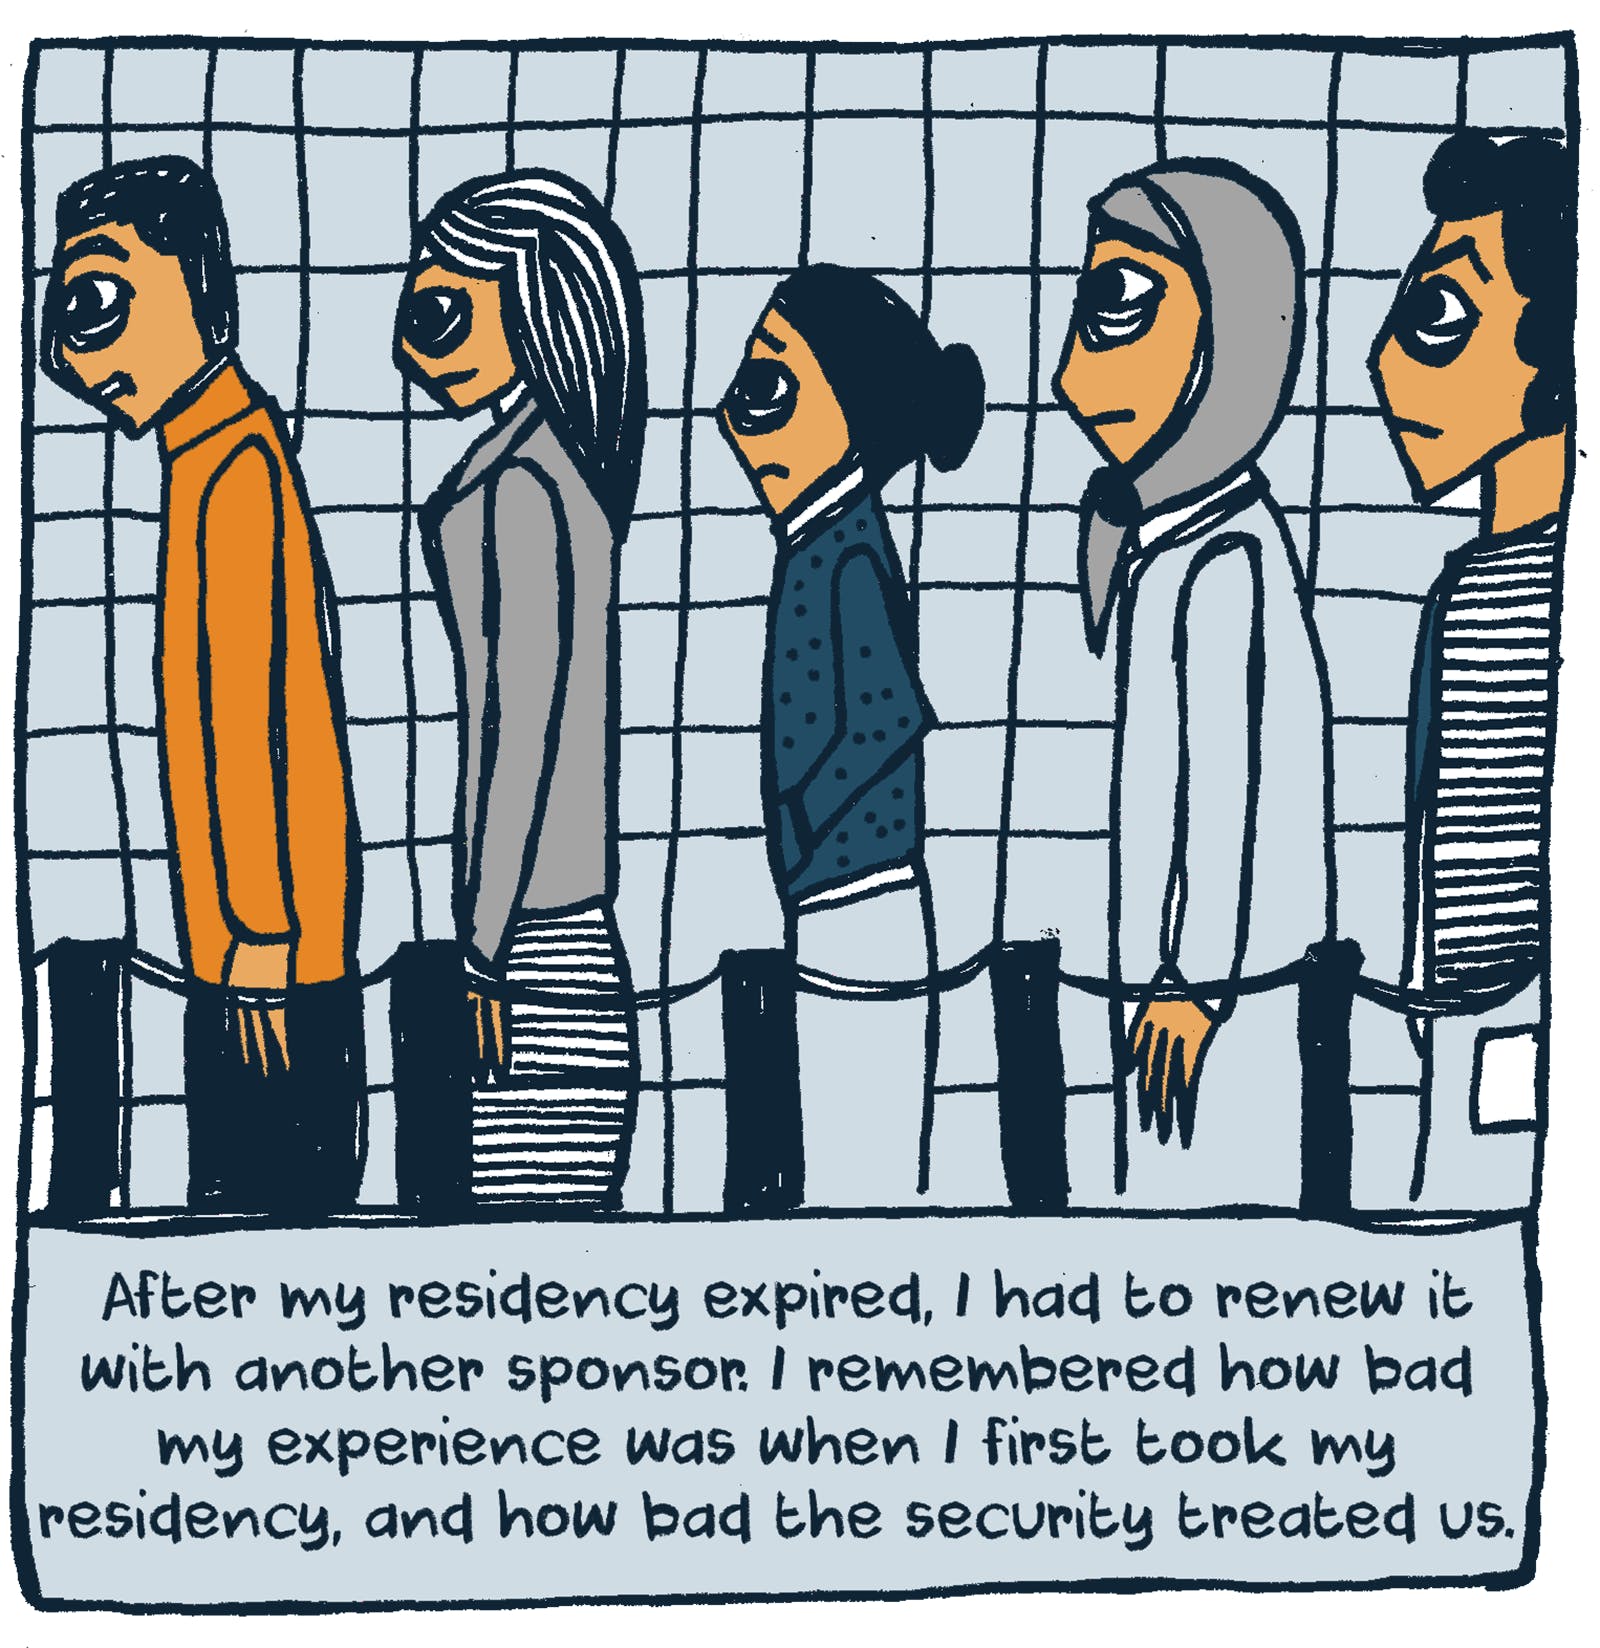 Comic strip from "Being illegal is unbearable" by Rawand Issa (photo: Rawand Issa)